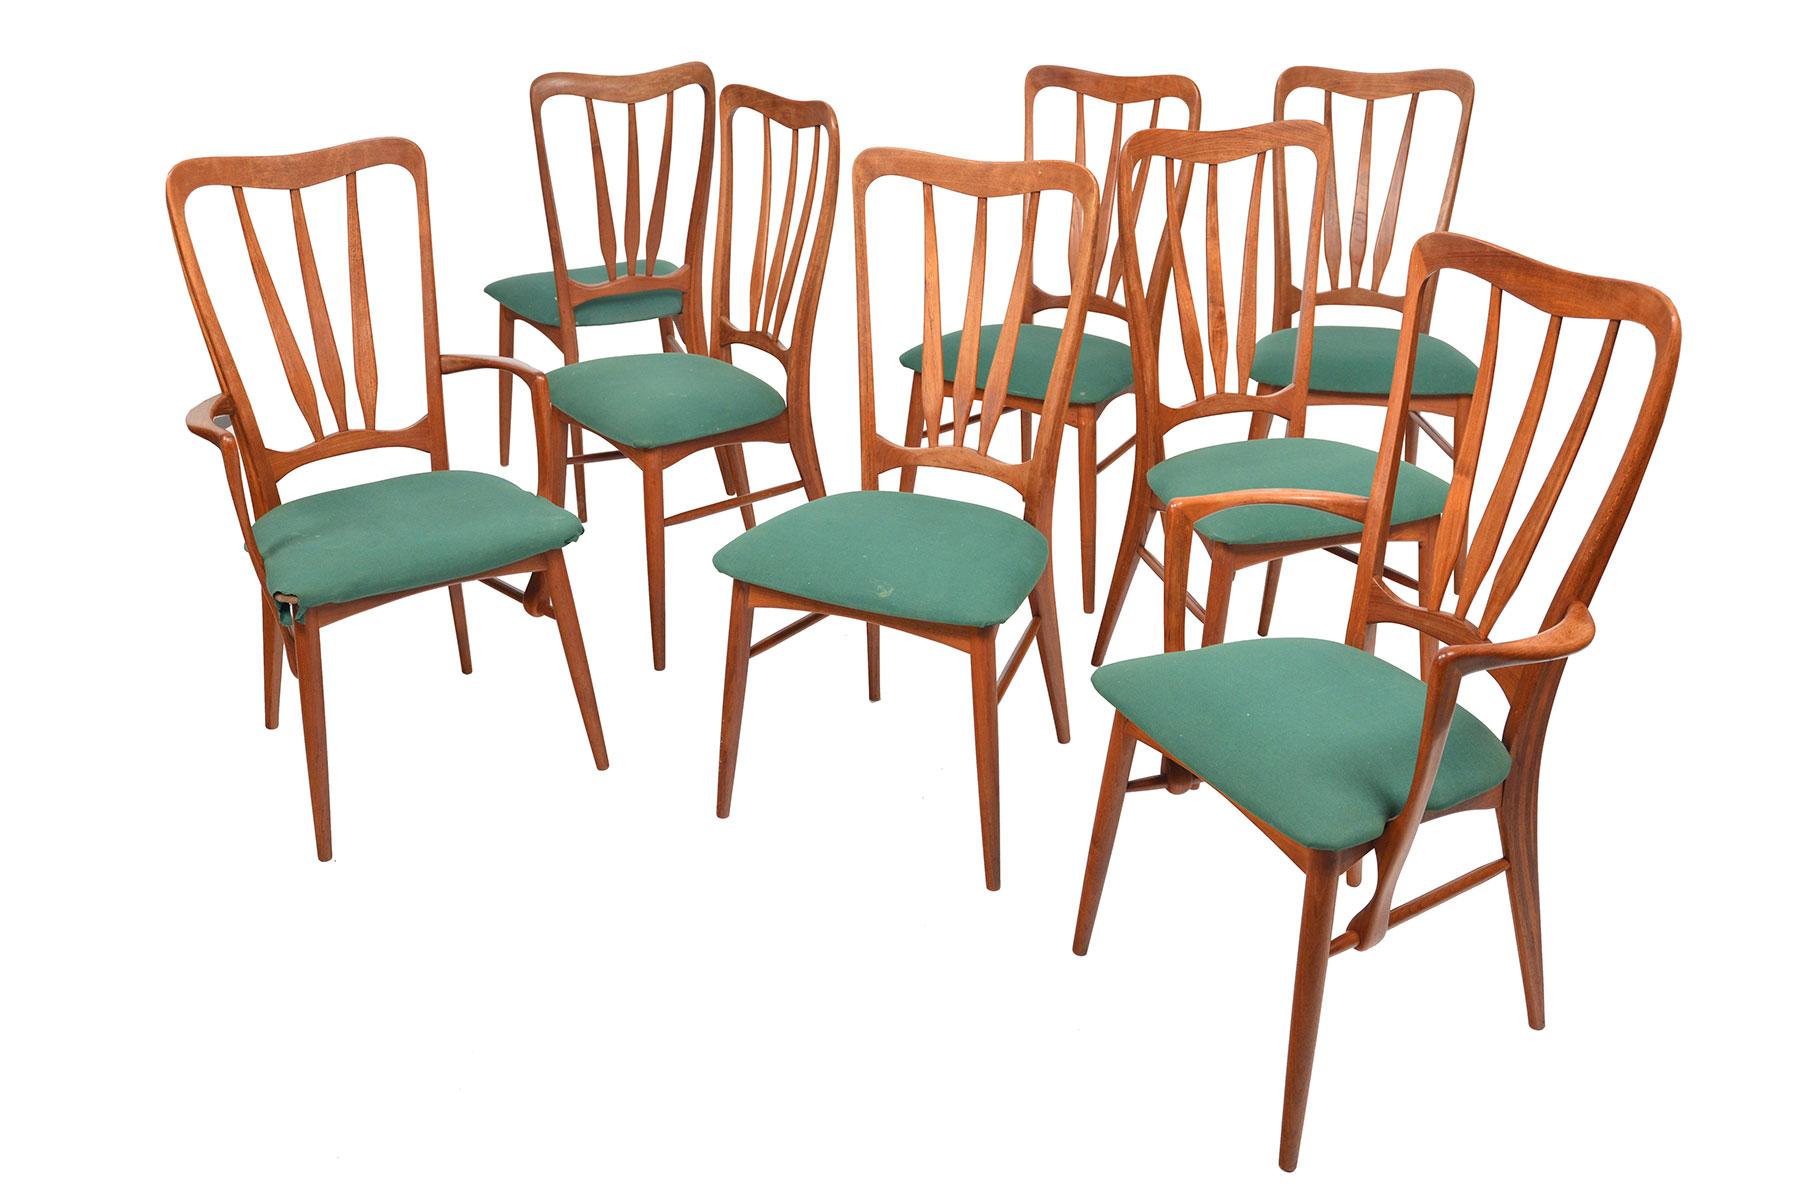 Set of eight teak dining chairs by Niels Koefoed for Koefoed Hornslet Møbelfabrik. Set includes two captain's chairs and six side chairs. Purchase price includes restoration.